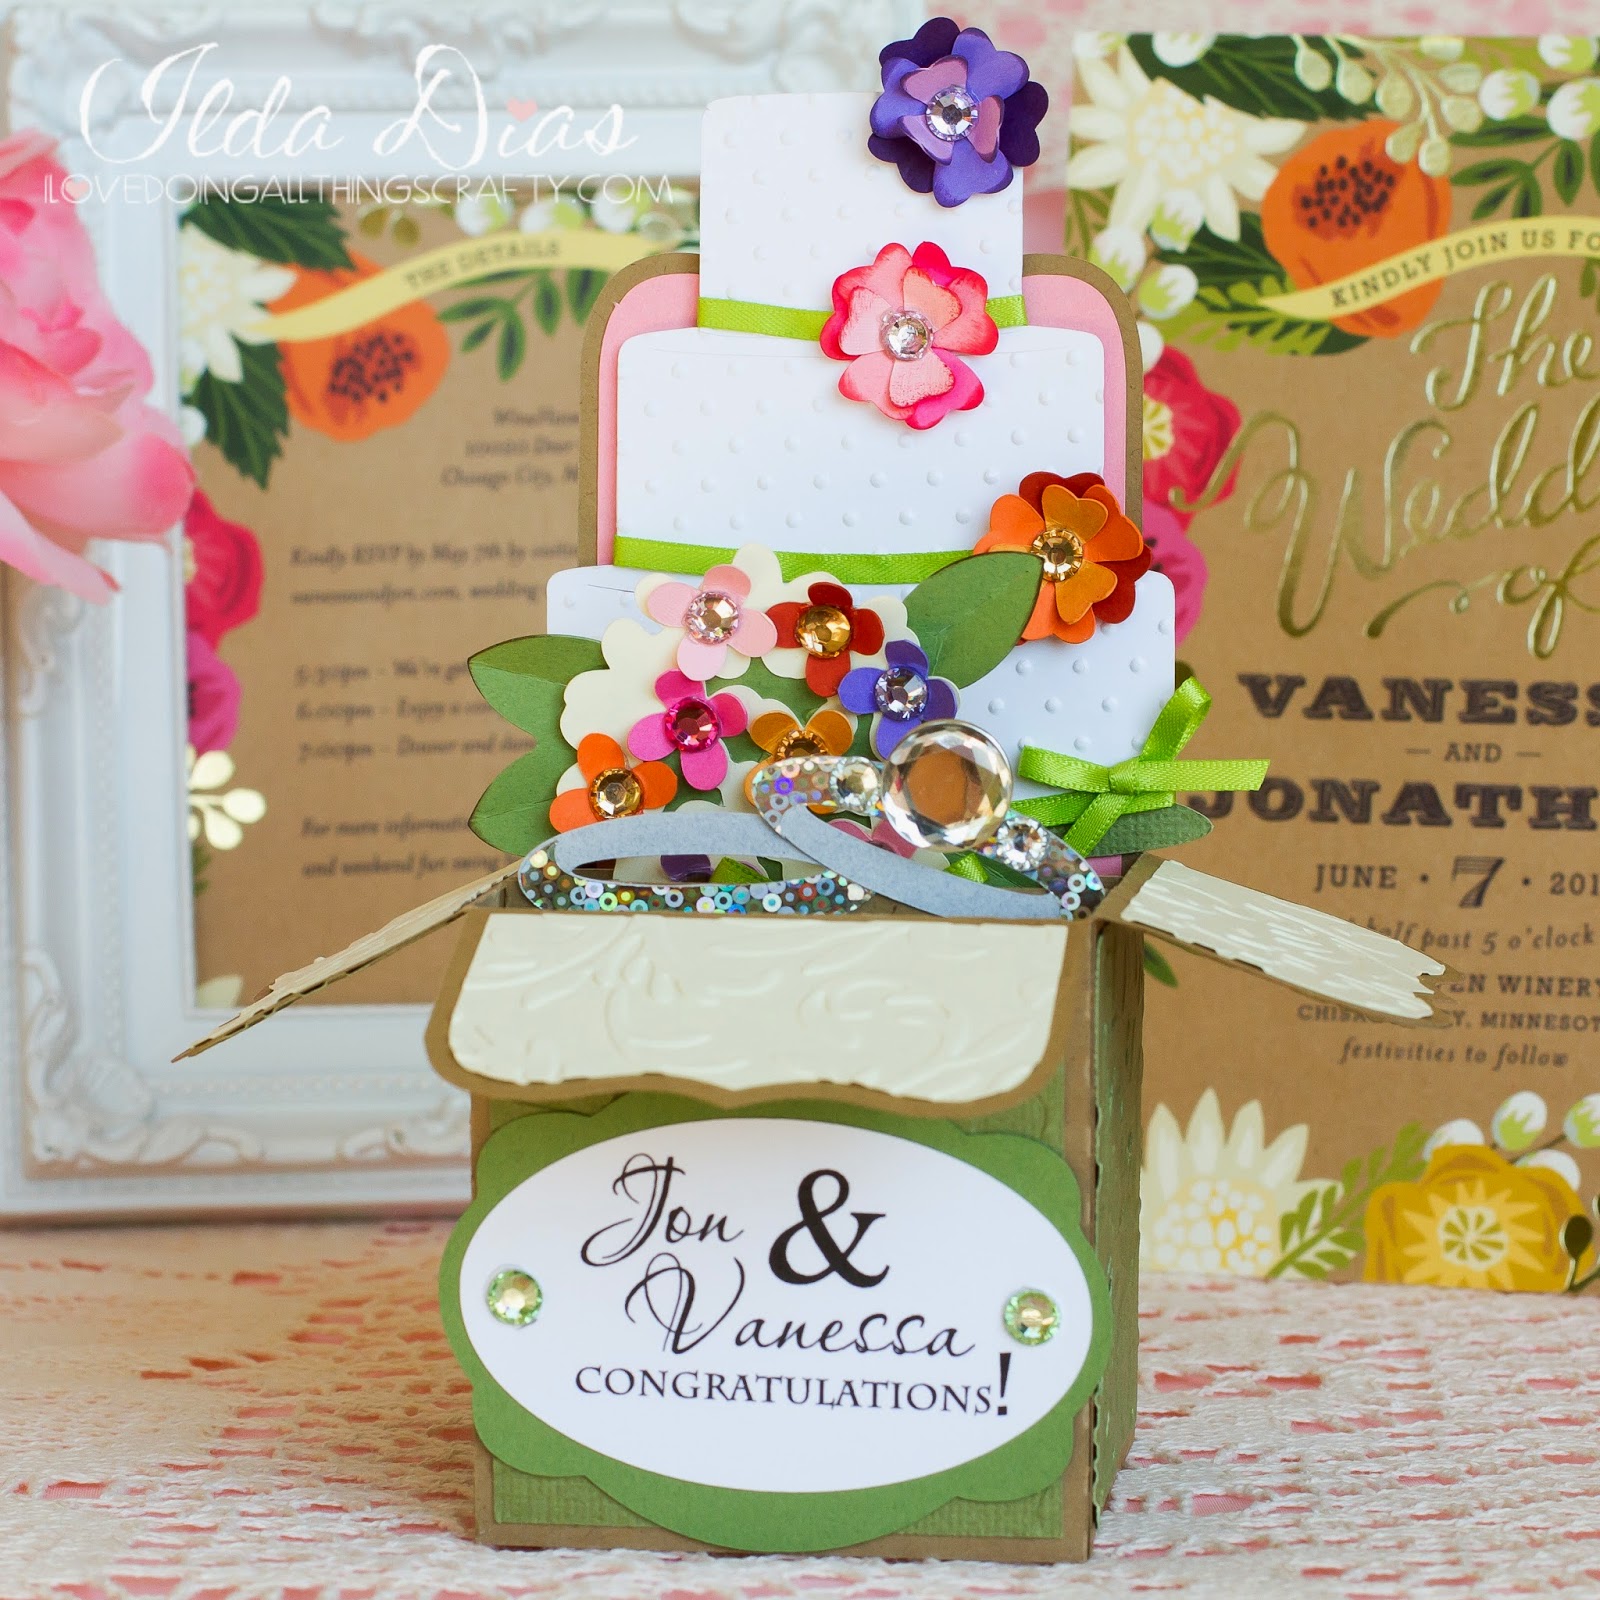 I Love Doing All Things Crafty Jon And Vanessa S Wedding Box Card Svgcuts